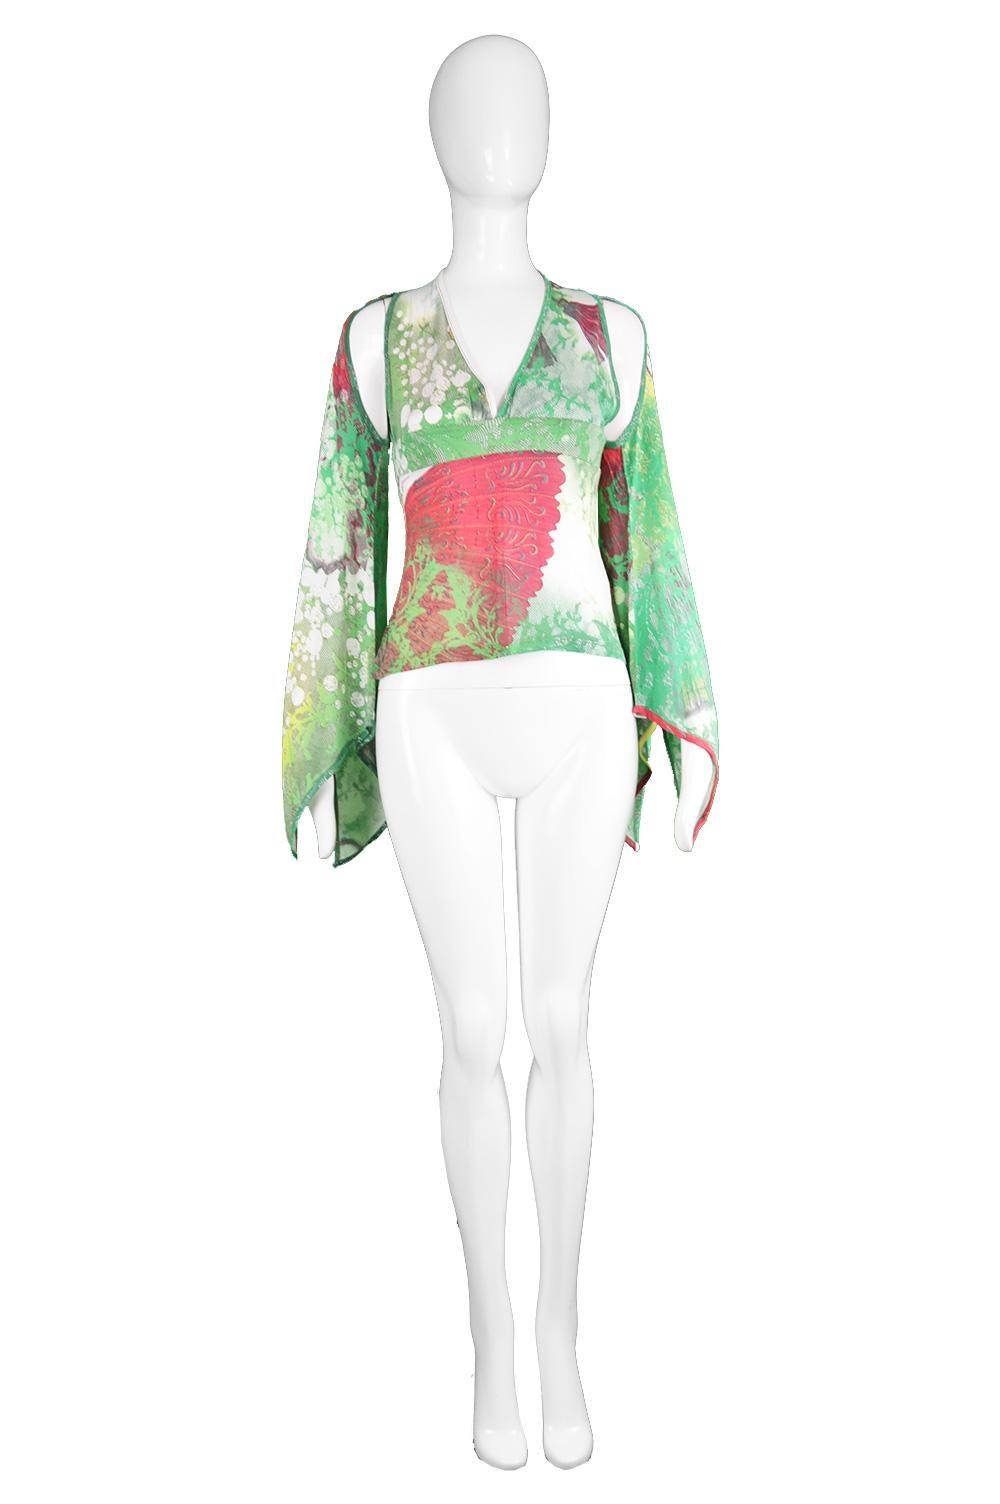 Just Cavalli Asian Long Cut Out Kimono Sleeve Green Modal Jersey Top 

Click 'Continue Reading' for size and description.

Size: Marked IT 44 which is roughly a UK 10-12/ US 6-8/ FR 38-40. Please check measurements. 
Bust - Stretches from 32 - 36” 